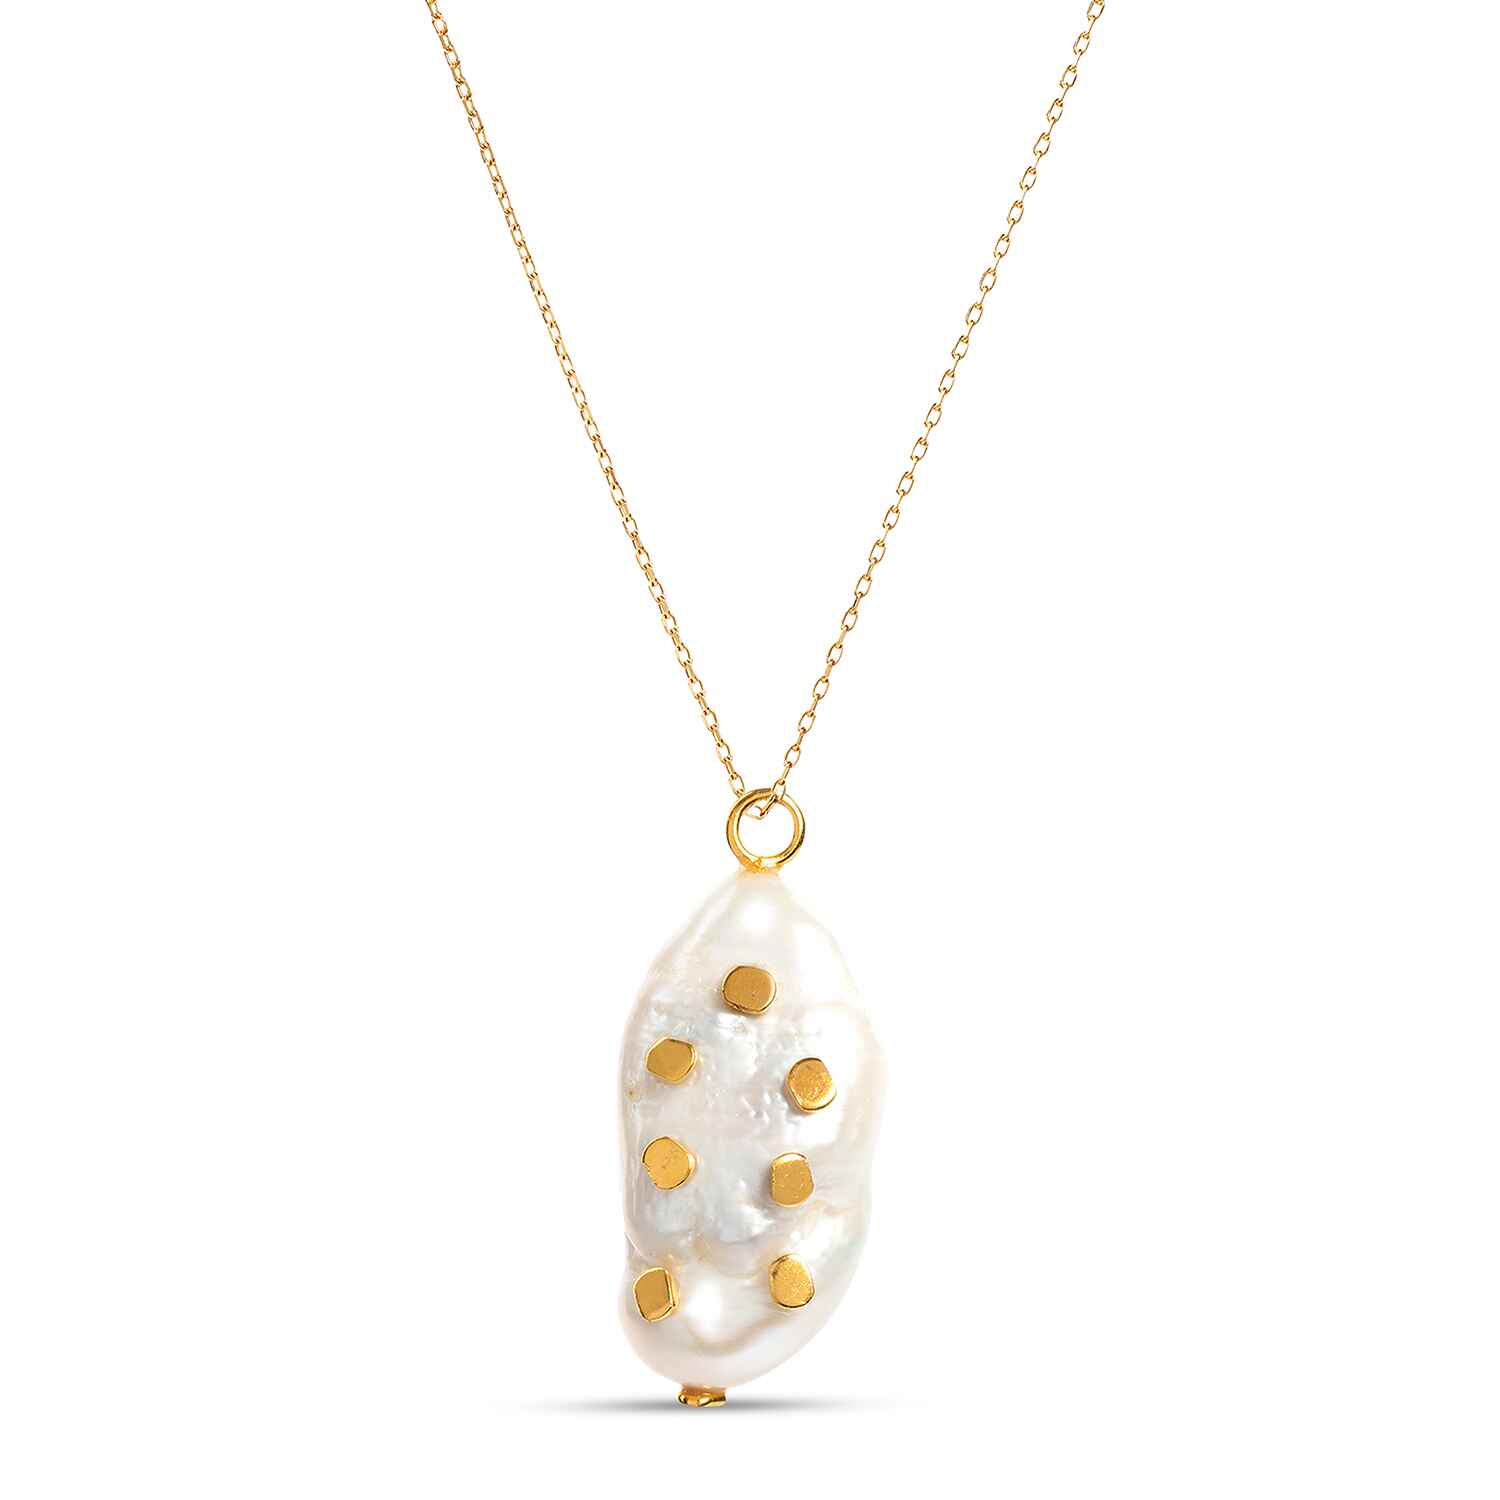 The Venus gold chain necklace showcases a large vintage Keshi pearl with tiny gold chips called barnacles. This elegant sustainable necklace features a unique shaped pearl, so no two are the same.